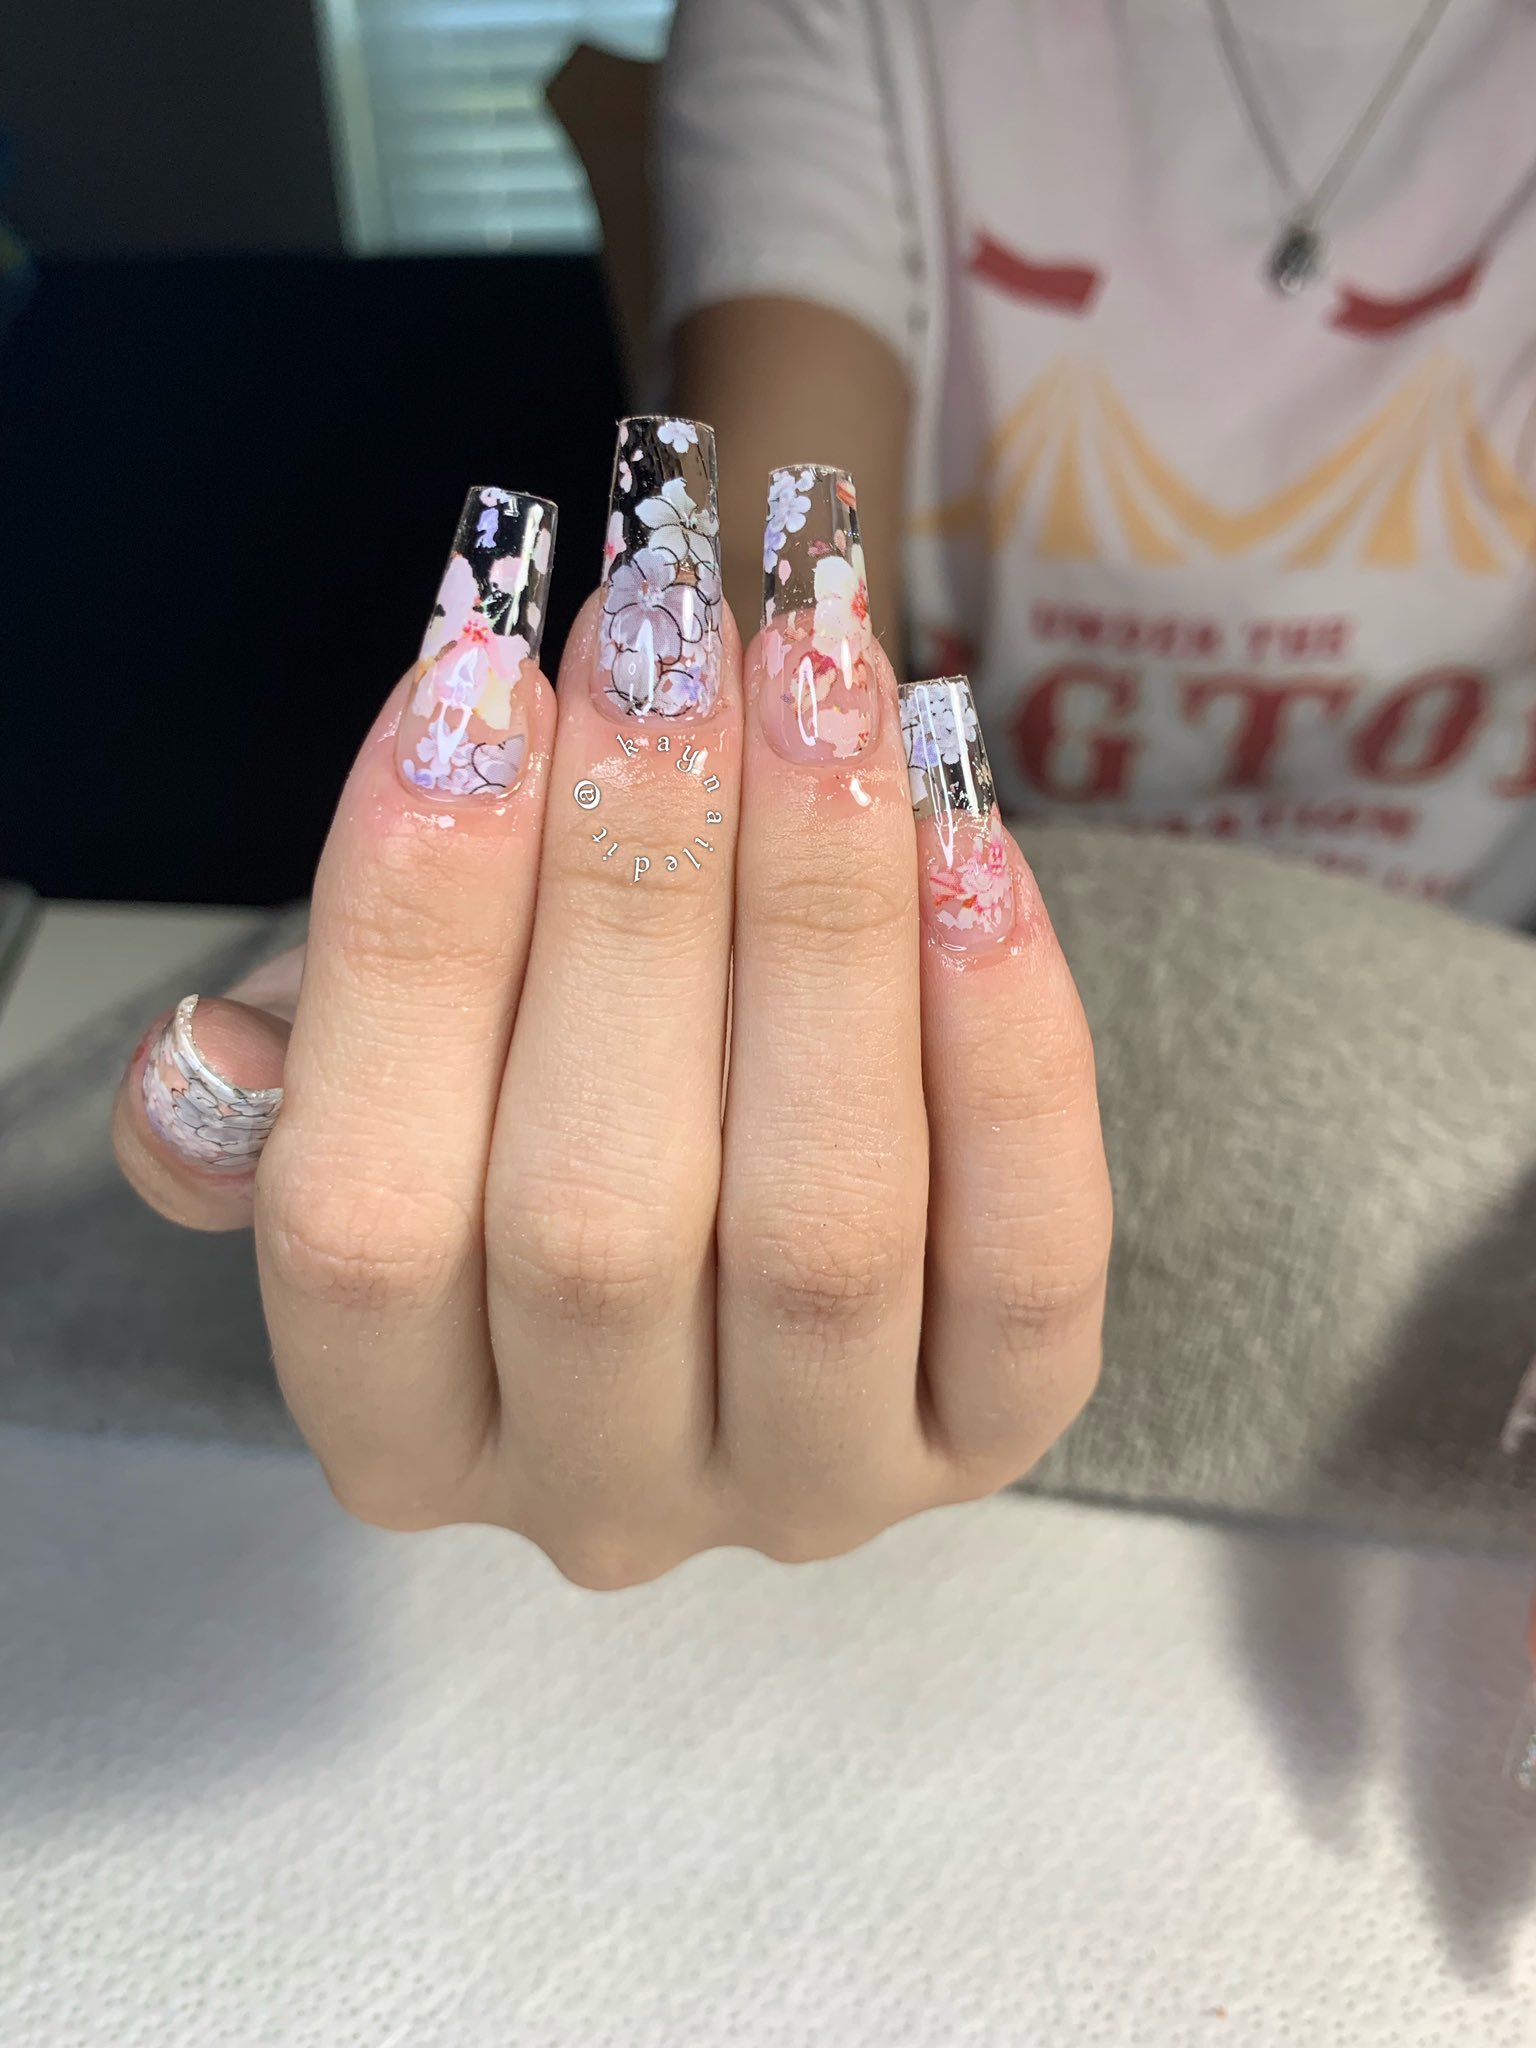 Kay On Twitter Clear Glitter Nails Mickey Nails Transparent Nails